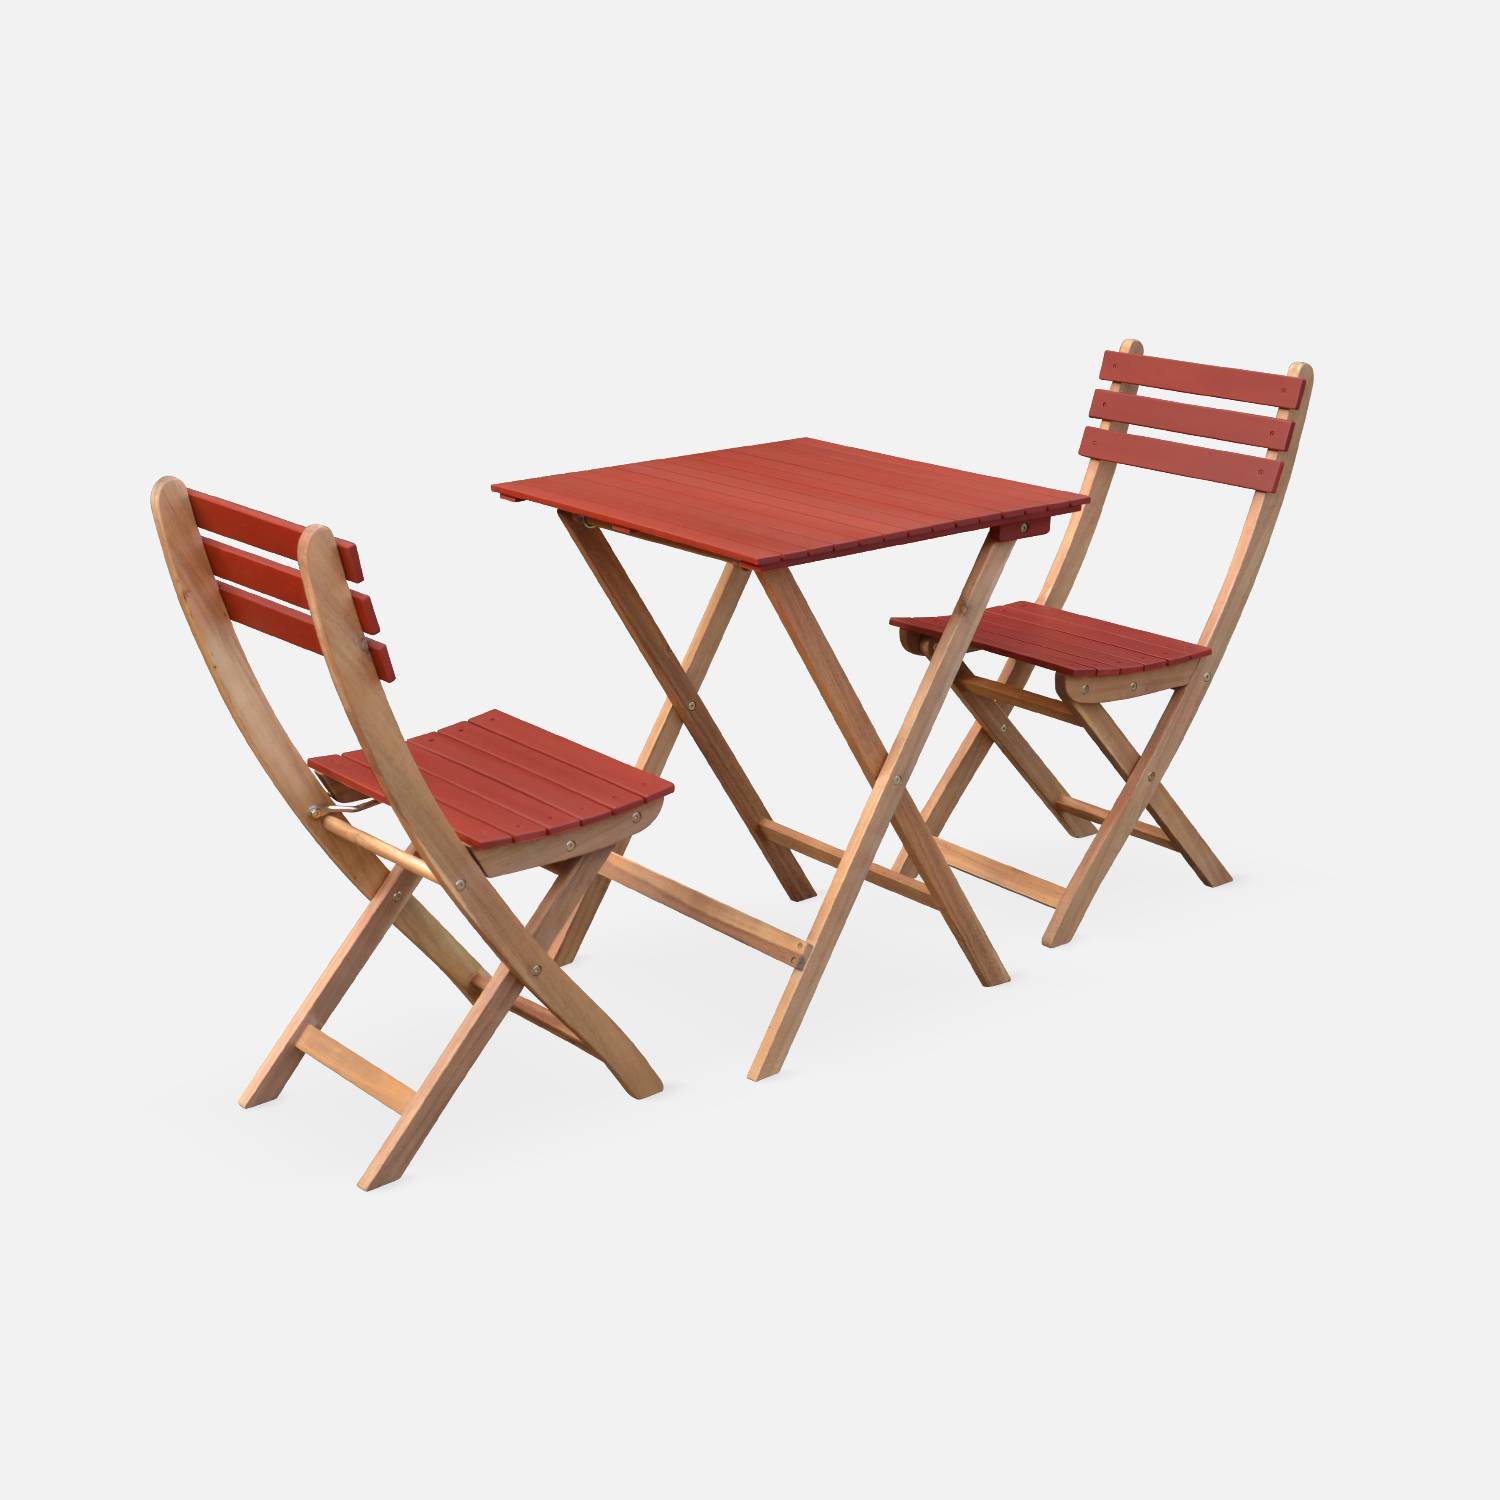 2-seater foldable wooden bistro garden table with chairs, 60x60cm, Terracotta | sweeek